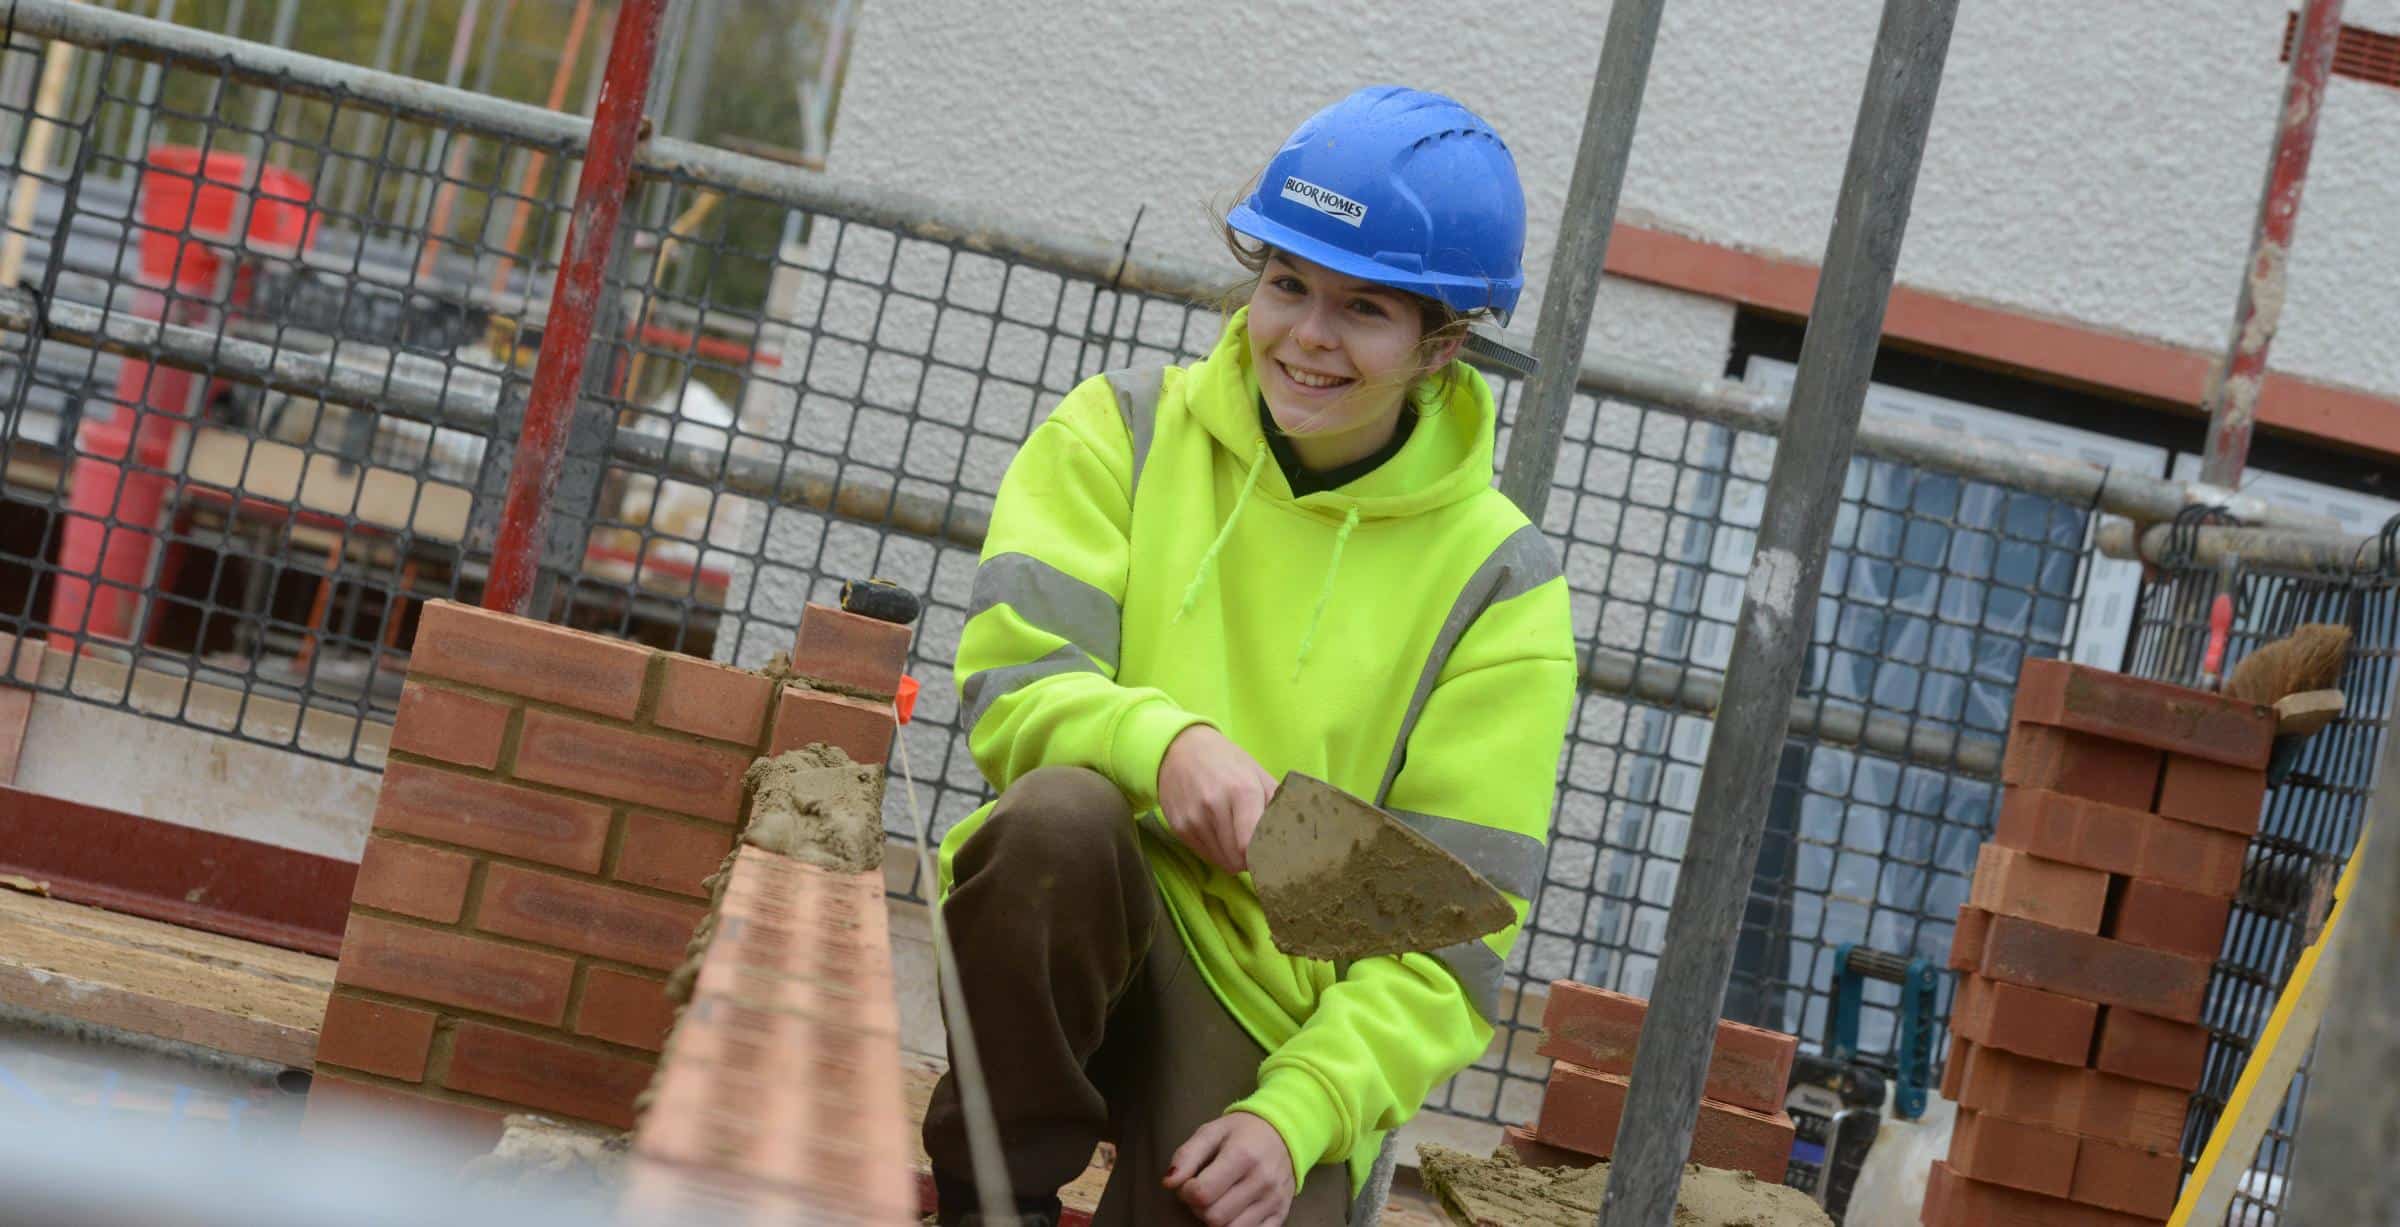 The Bricklayers-Trades Skills for Women